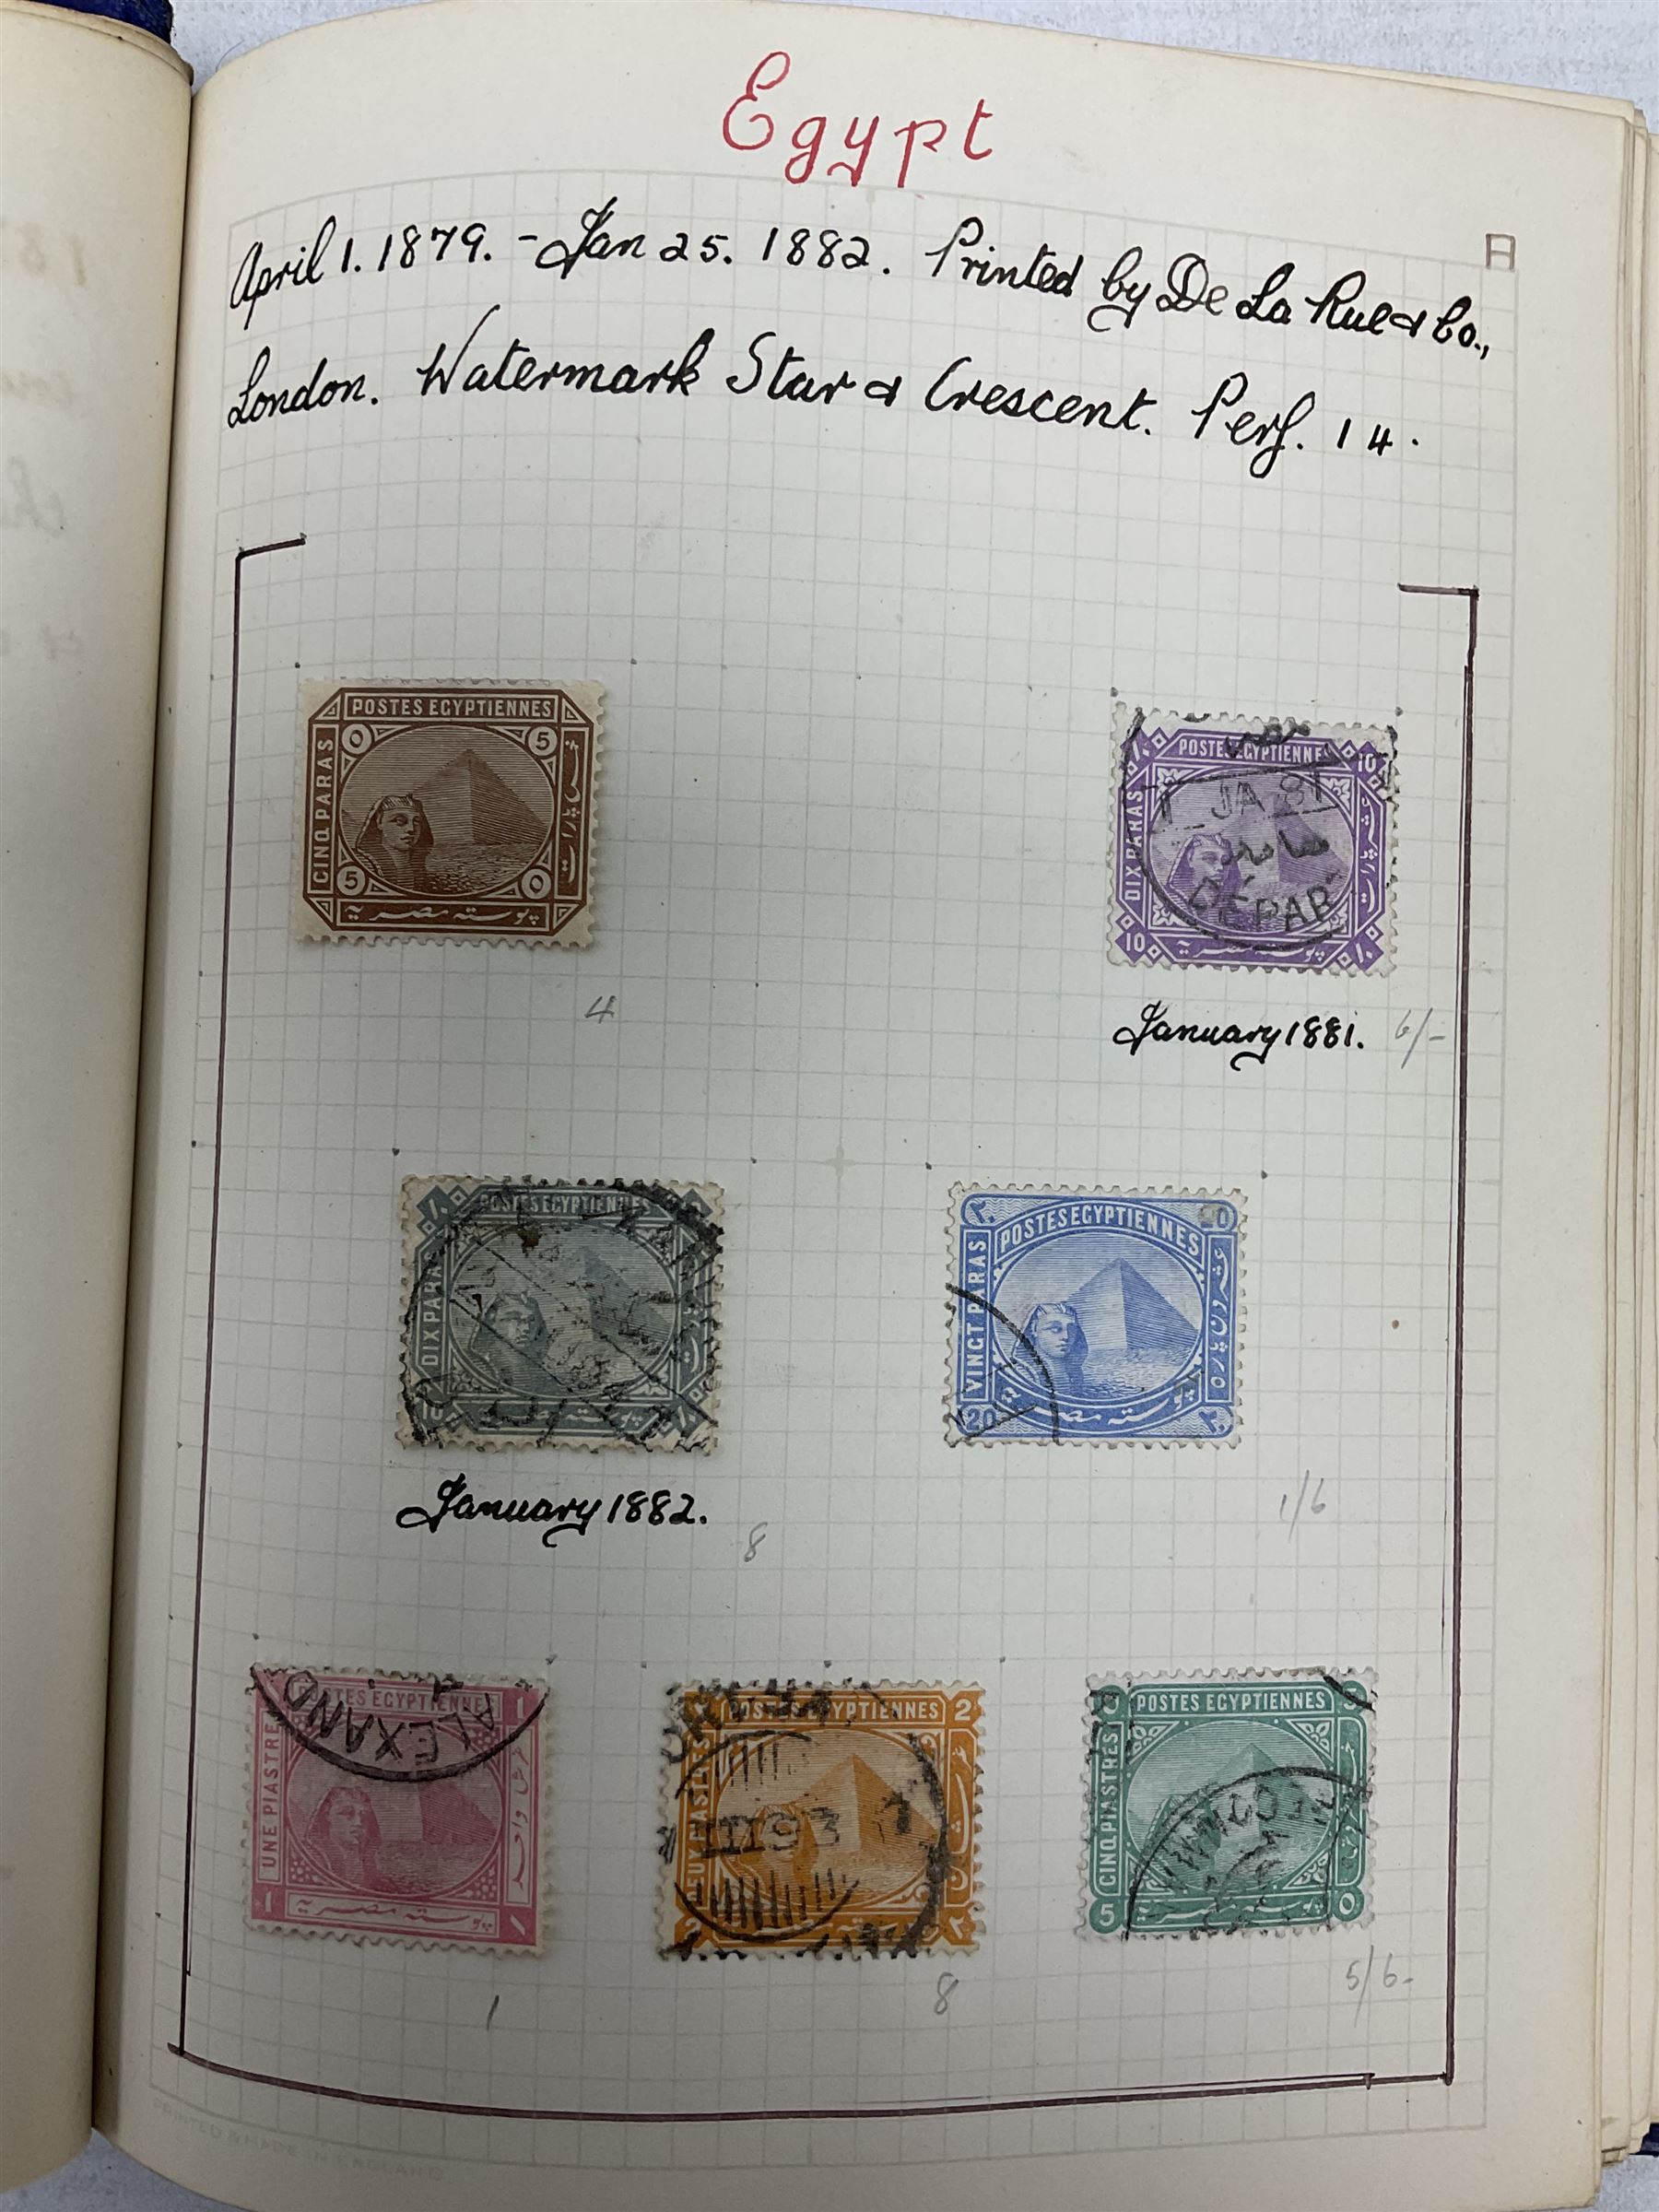 Egypt 1866 and later stamps - Image 83 of 761